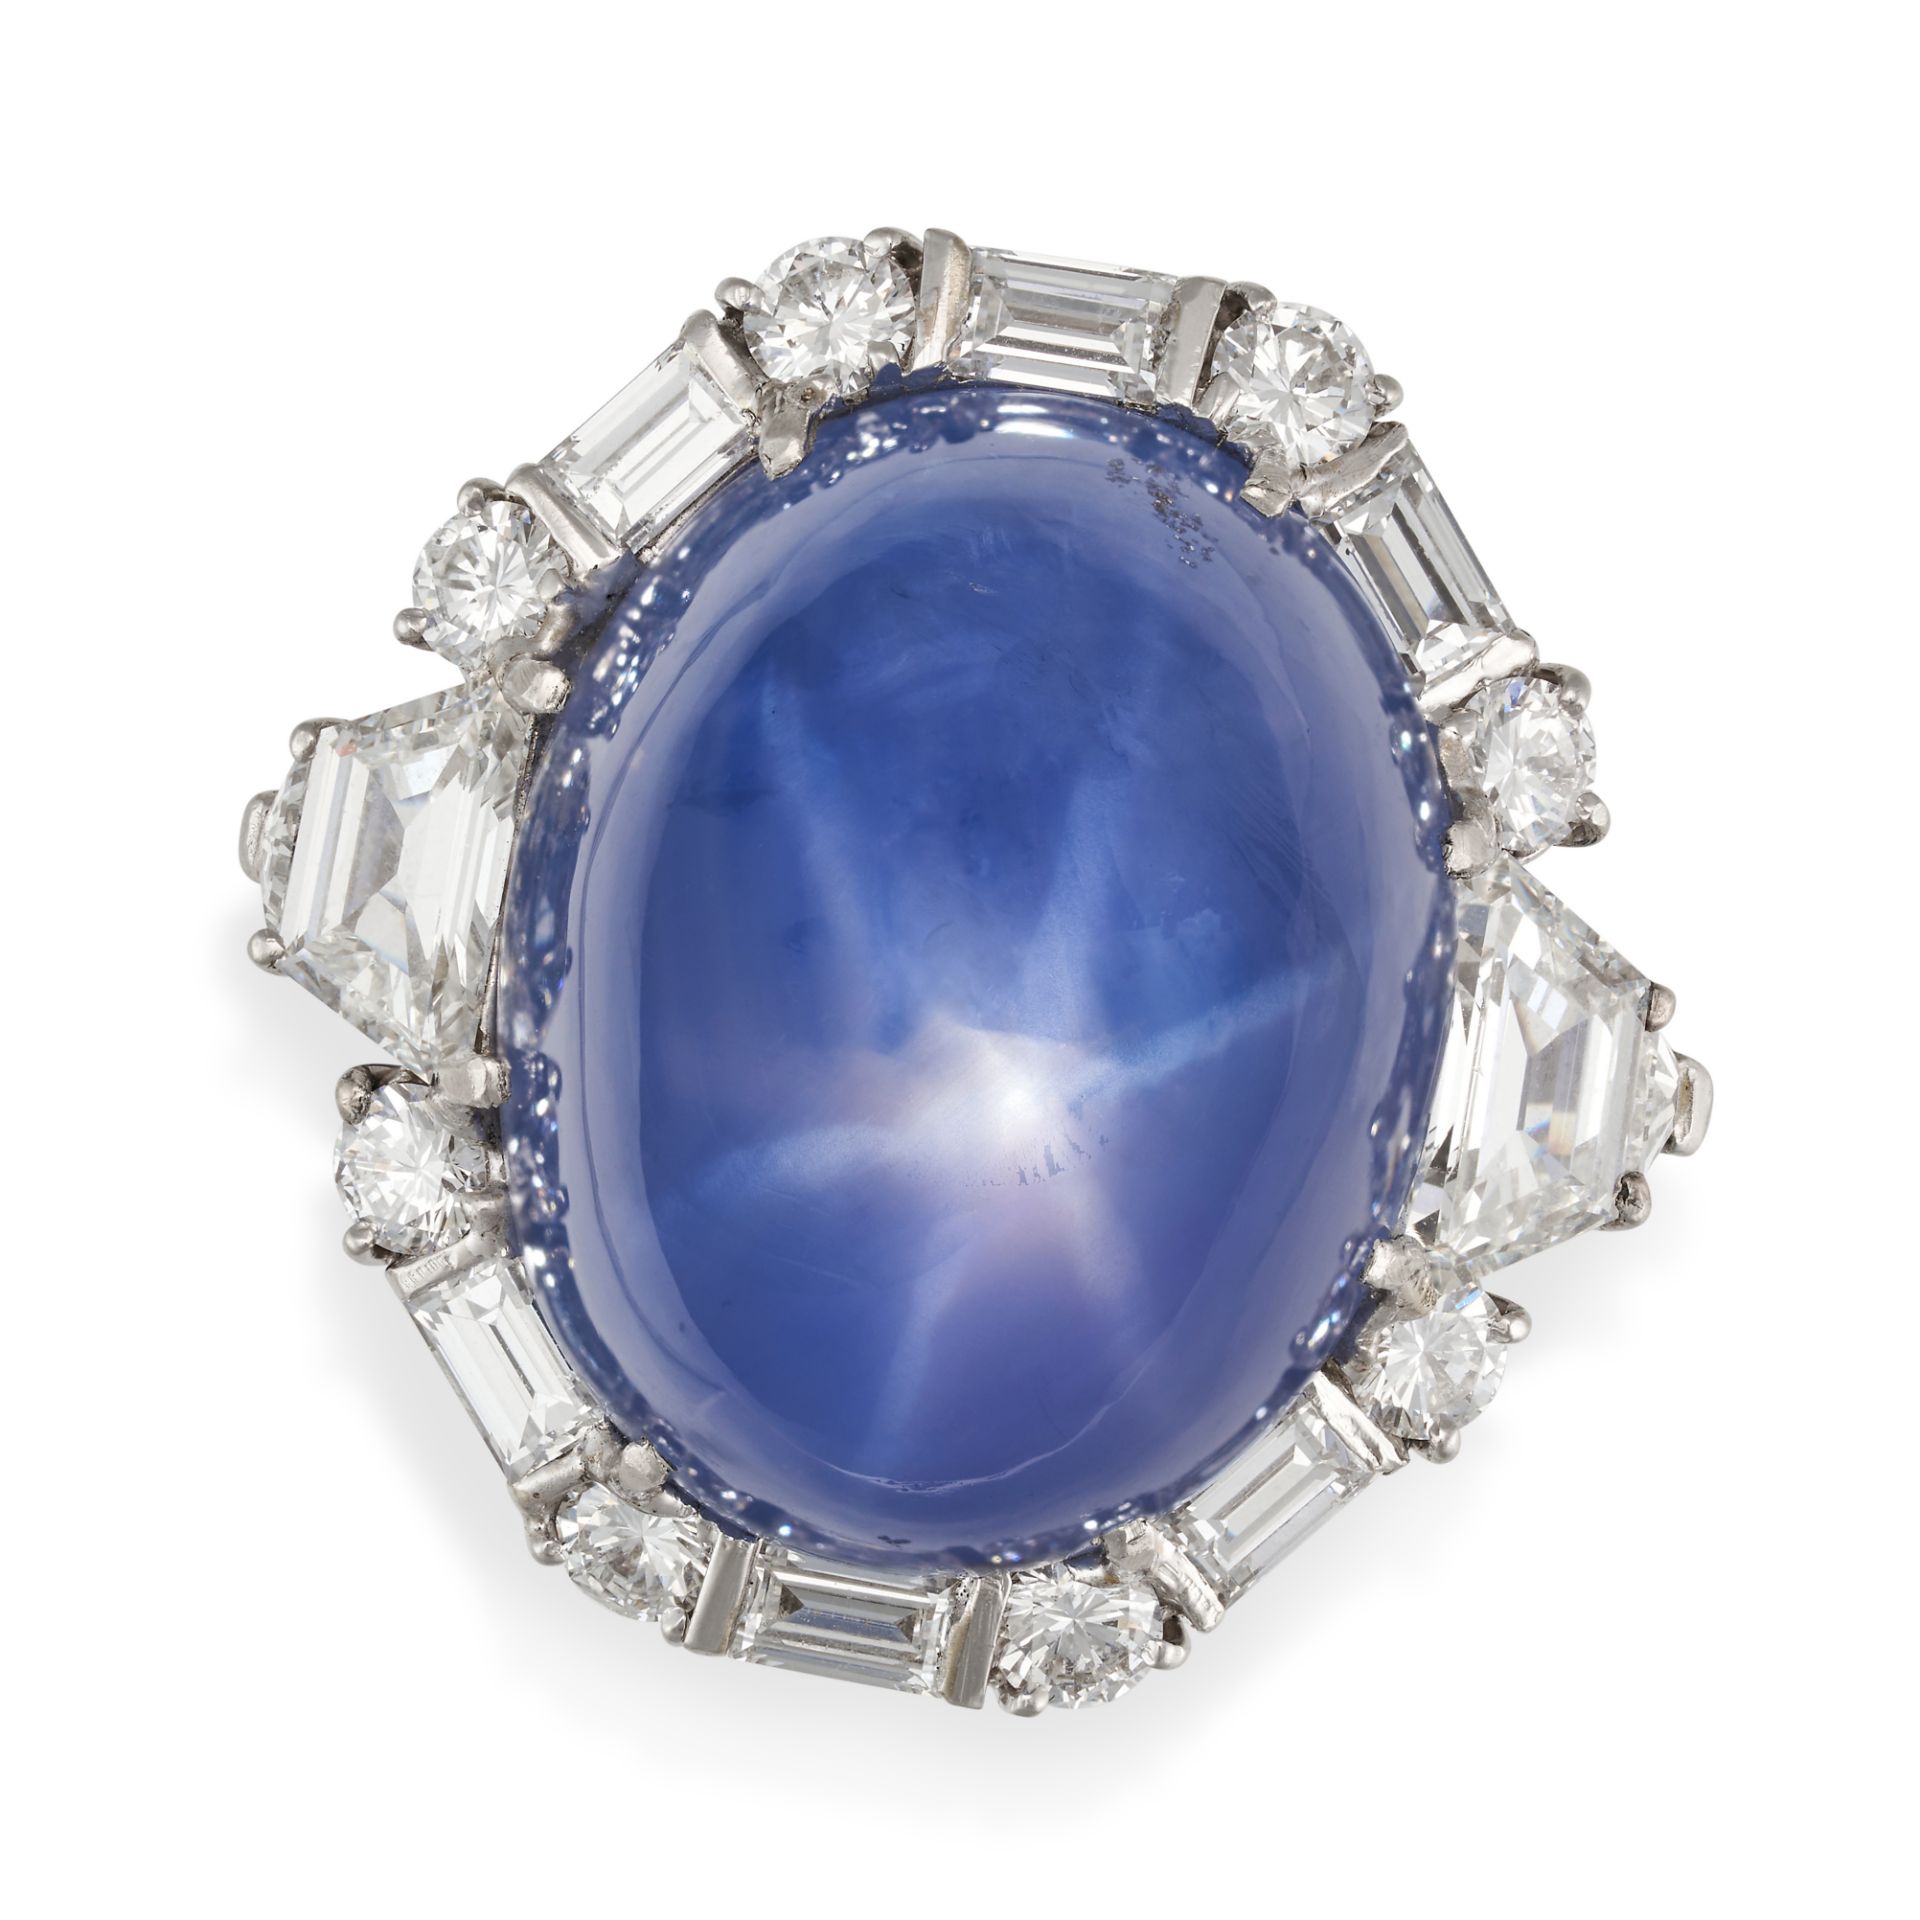 BULGARI, AN IMPORTANT STAR SAPPHIRE AND DIAMOND RING in platinum, set with a cabochon star sapphi...